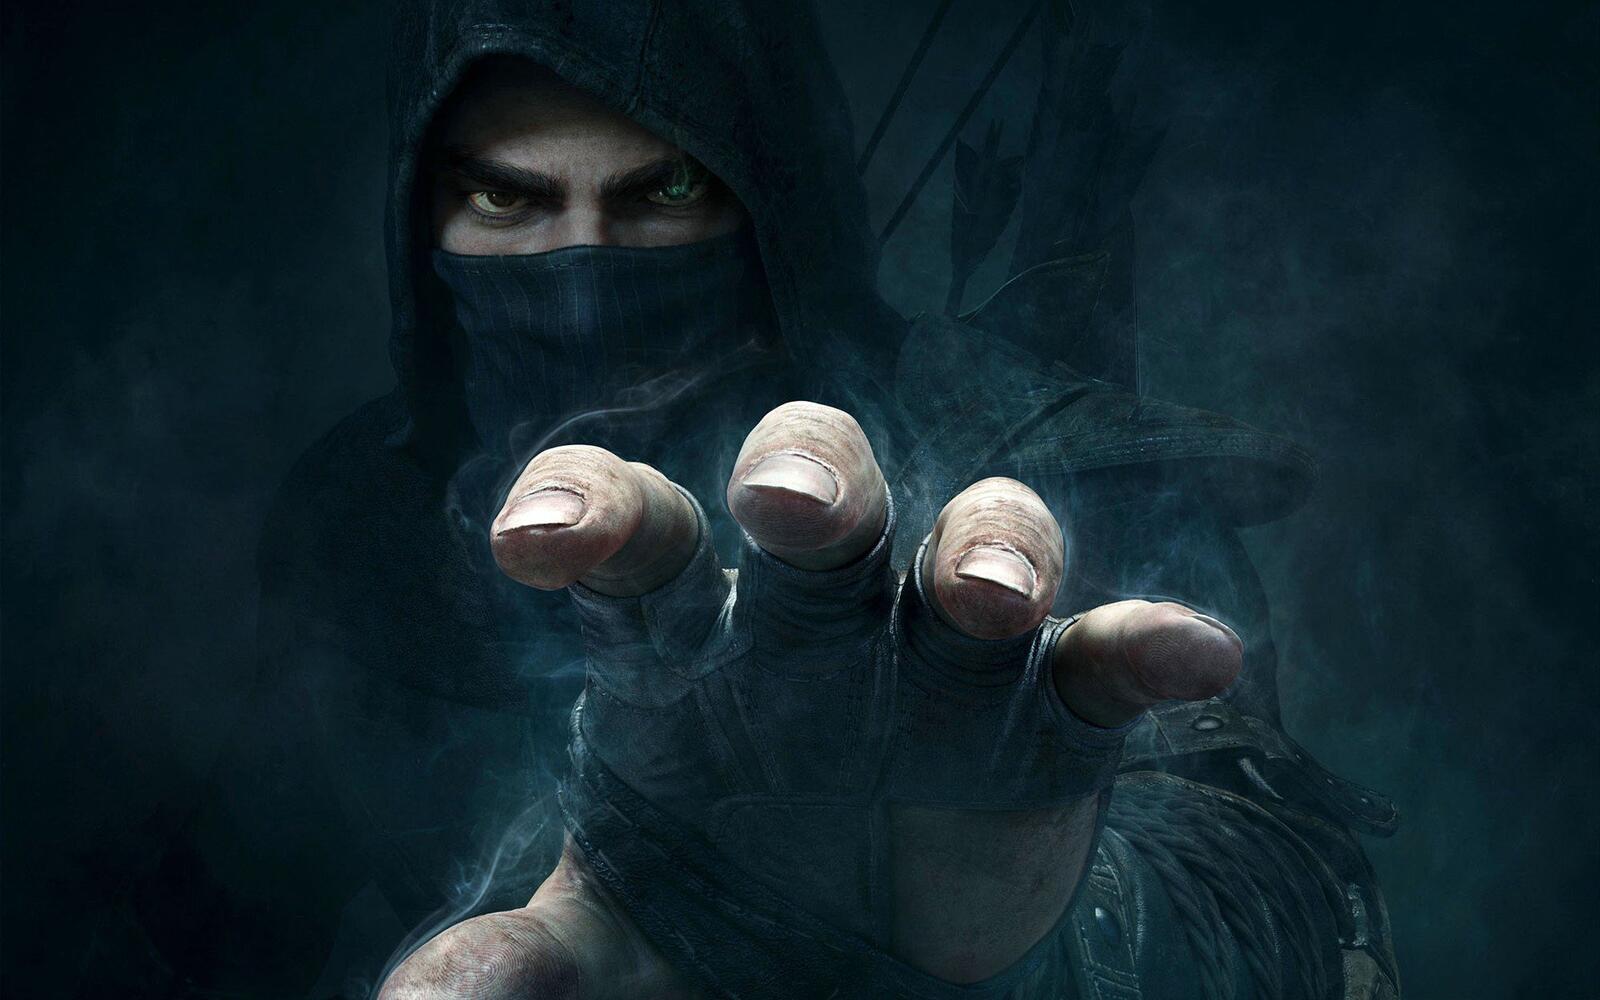 Wallpapers Thief games Pc Games on the desktop